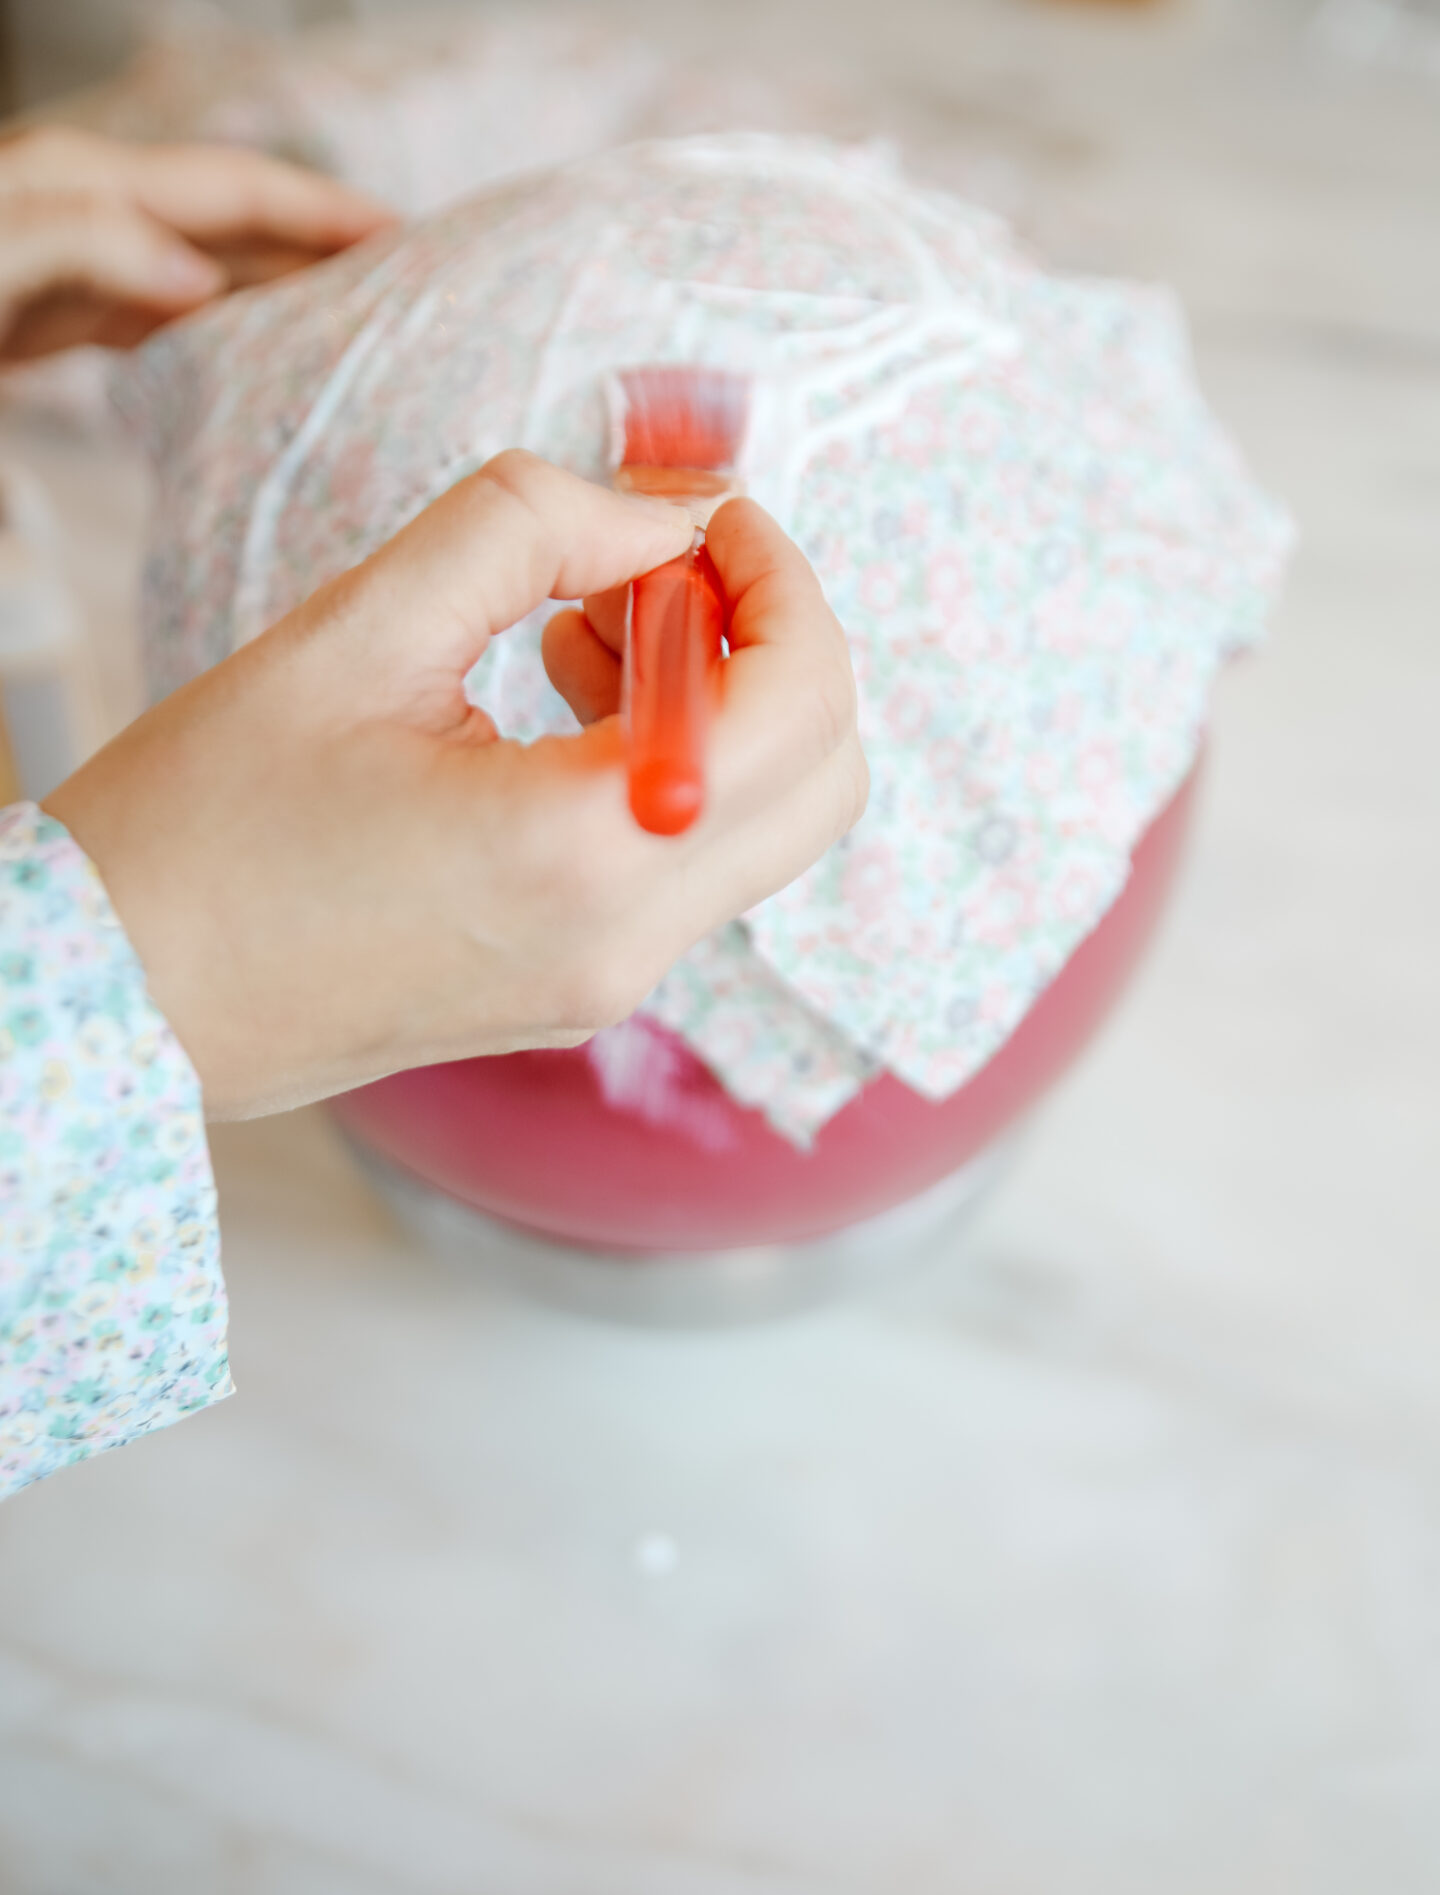 how to papier mache bowls using old fabric pieces